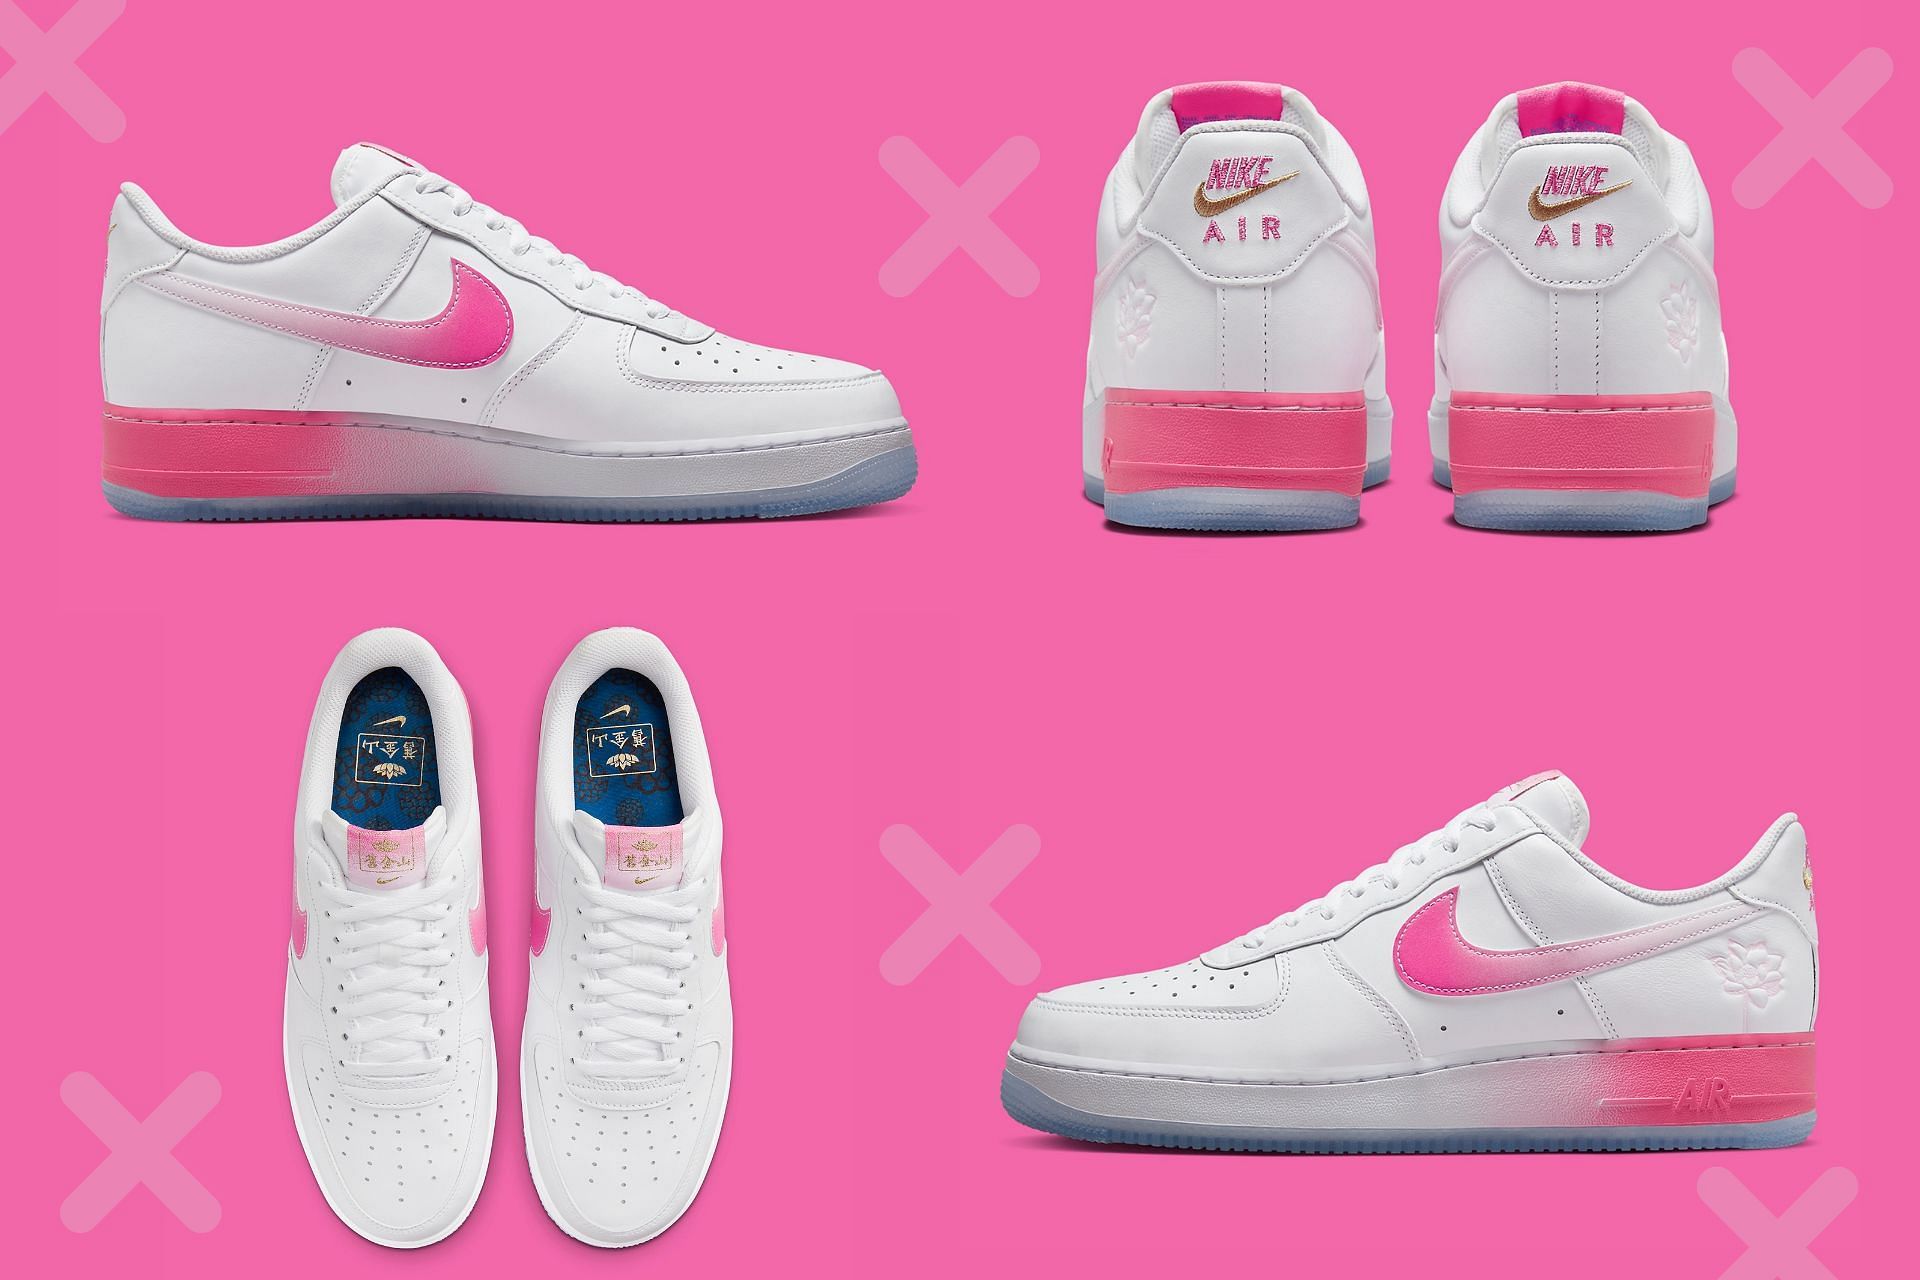 Upcoming Nike Air Force 1 San Francisco Chinatown sneakers, which arrive clad in Pink and White (Image via Sportskeeda)